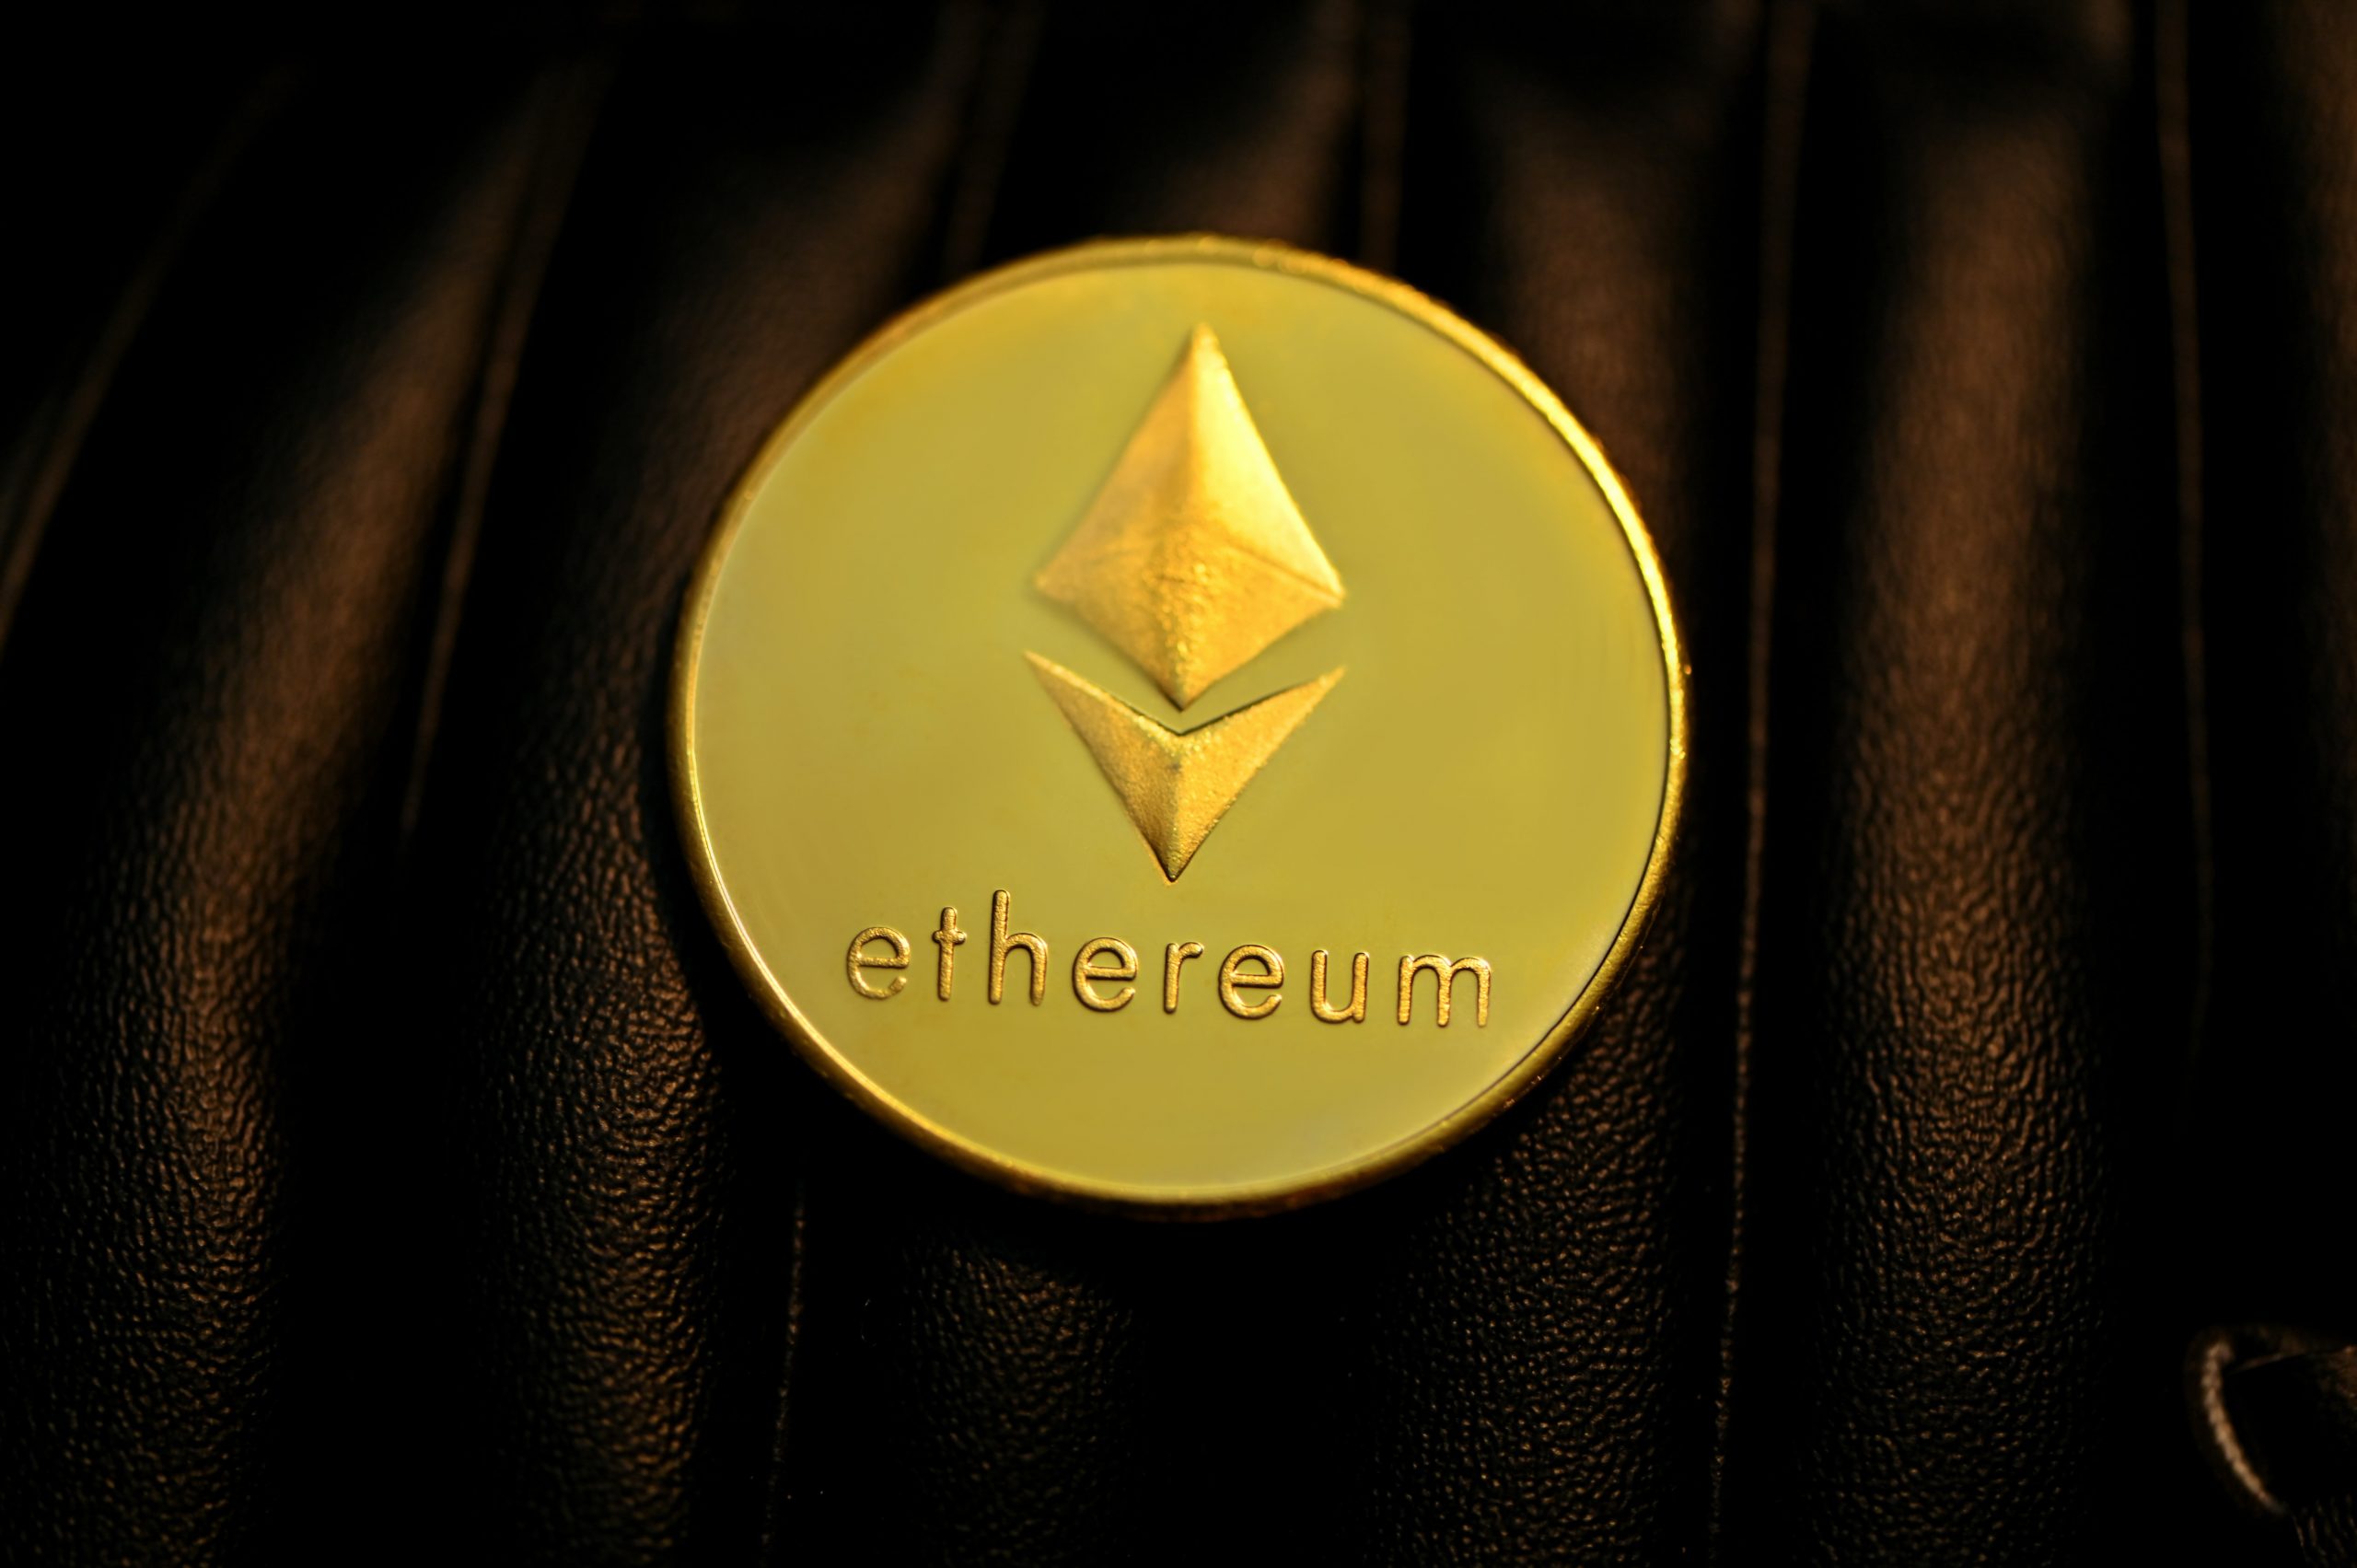 Ethereum to switch to Proof-of-Stake in September 2022